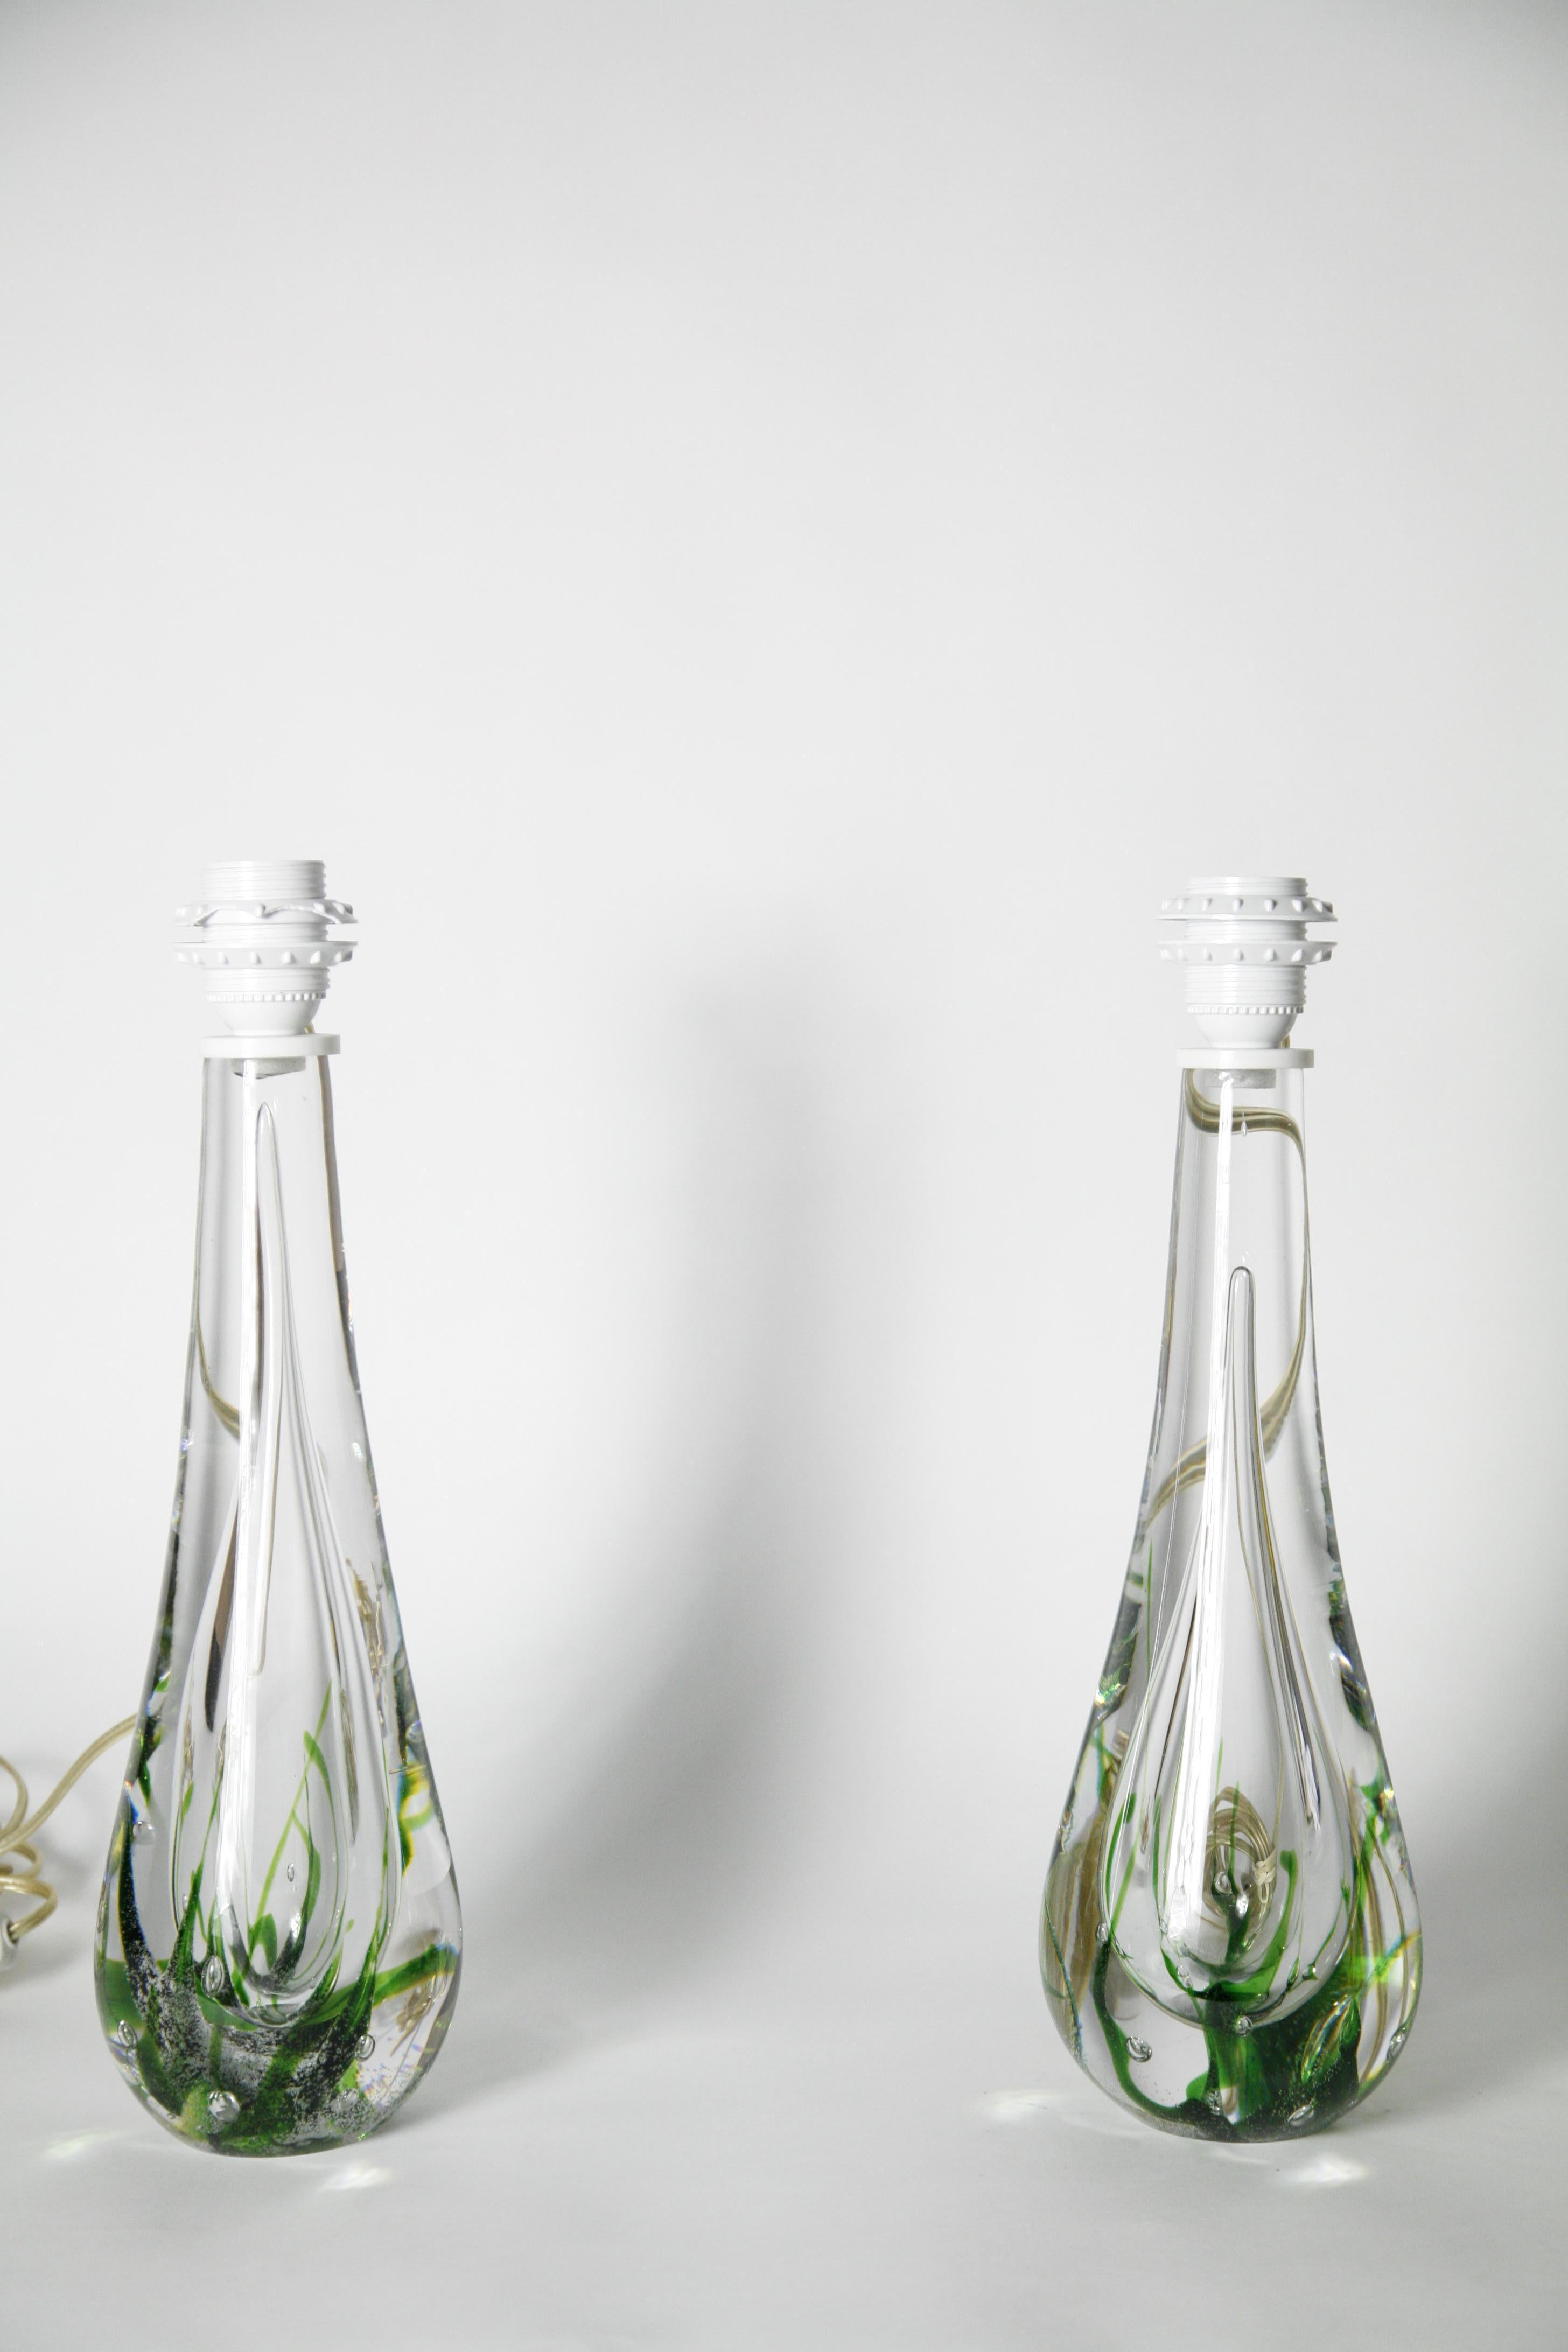 Pair of solid clear glass lamps designed by Vicke lindstrand produced by the Swedish glassmaker Kosta 1980 Sweden signed clear crystal with air bubbles and green glass swirls inside the glass heavy solid bases. 
Measurement is for the glass base